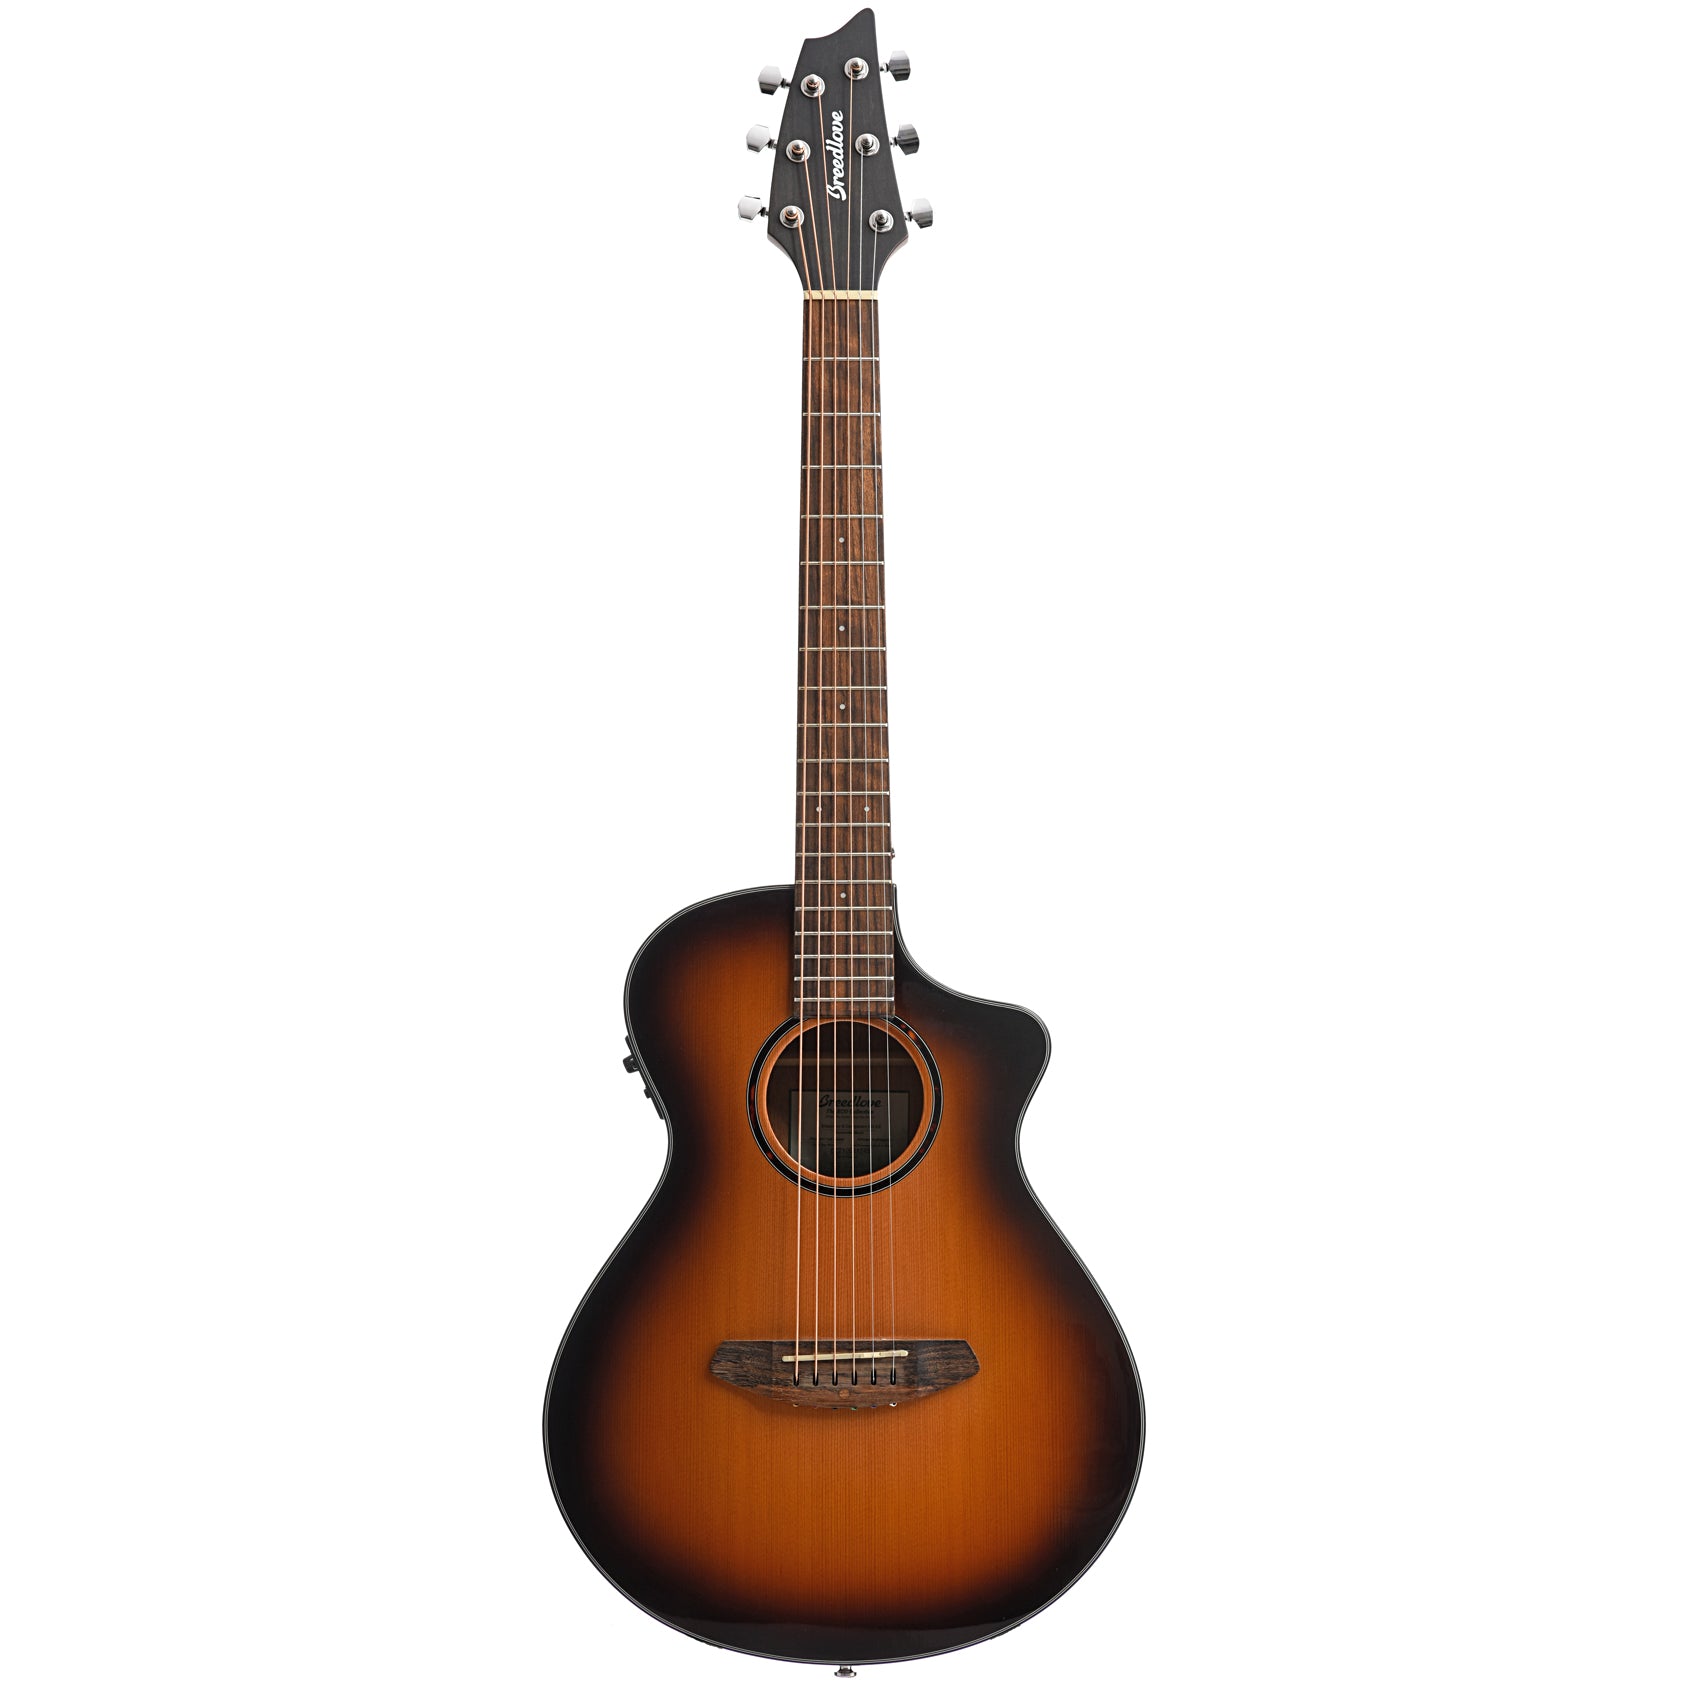 Image 2 of Breedlove Discovery S Companion Edgeburst CE Red Cedar-African Mahogany Acoustic-Electric Guitar - SKU# DSCP44CERCAM : Product Type Flat-top Guitars : Elderly Instruments